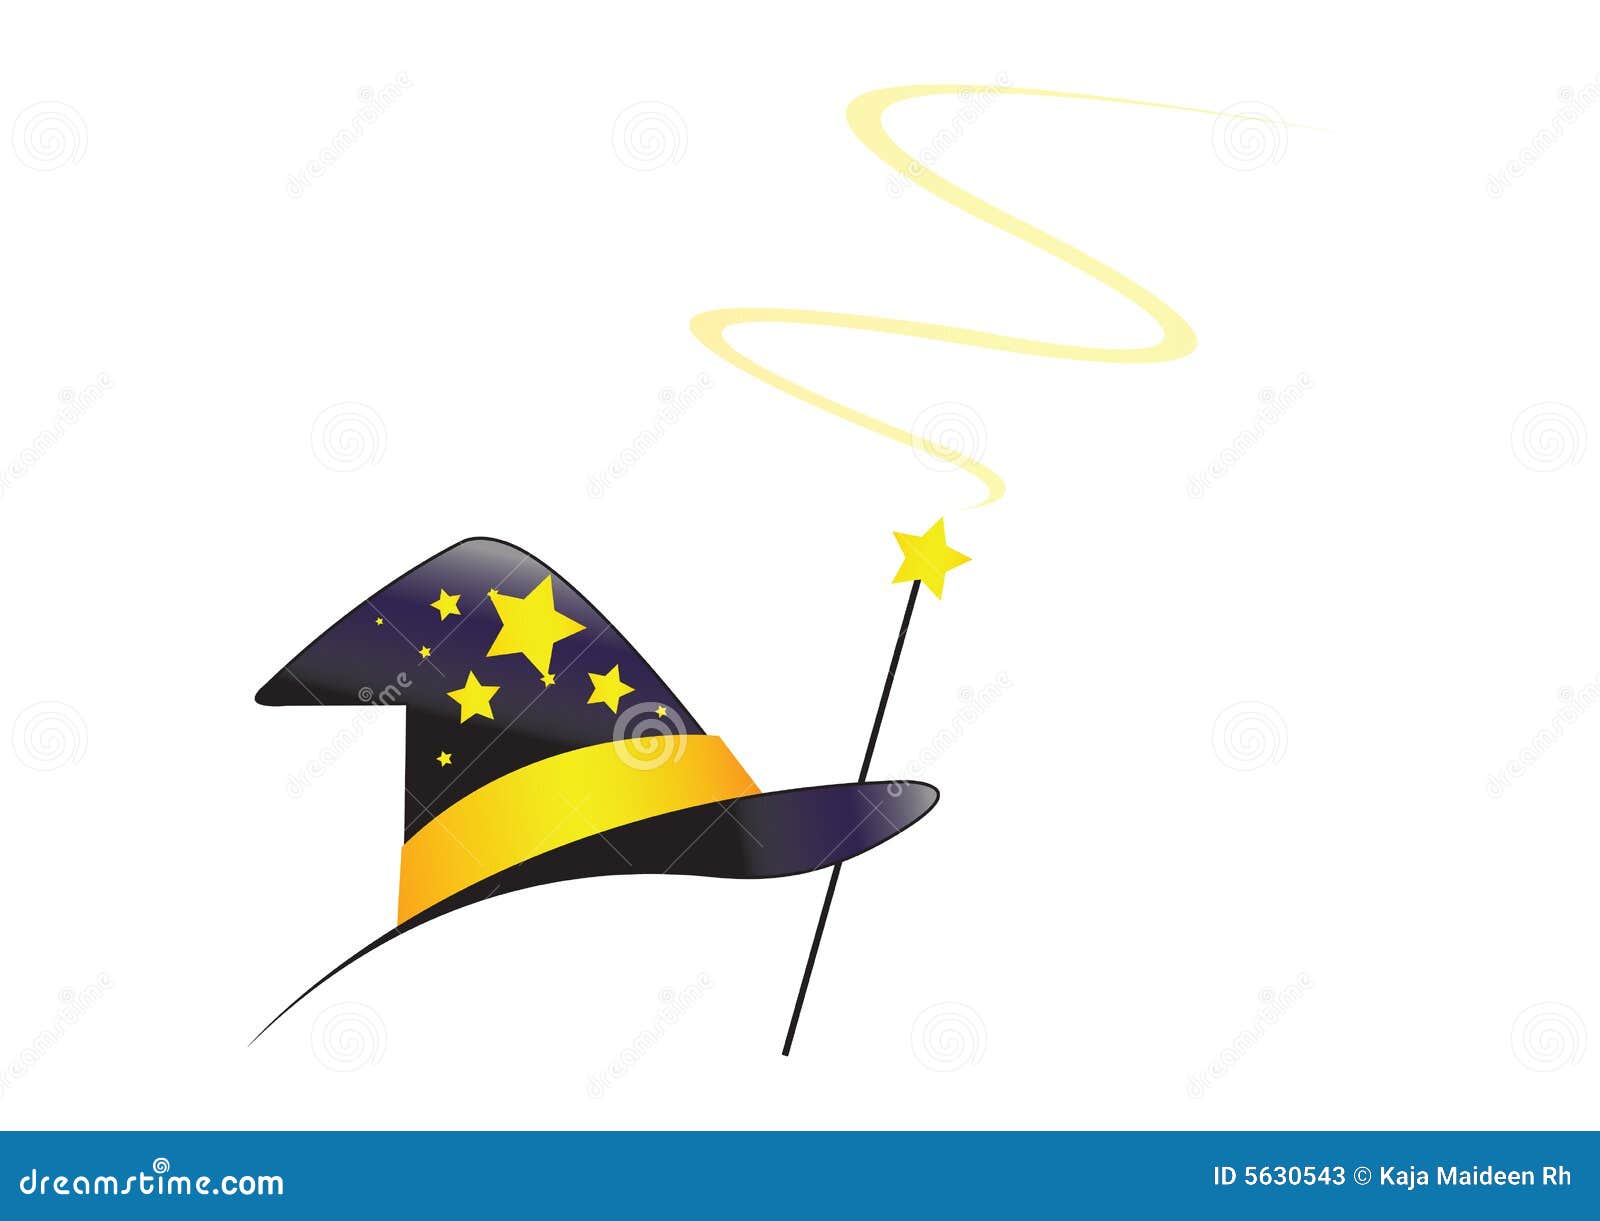 wizard hat clipart - photo #35